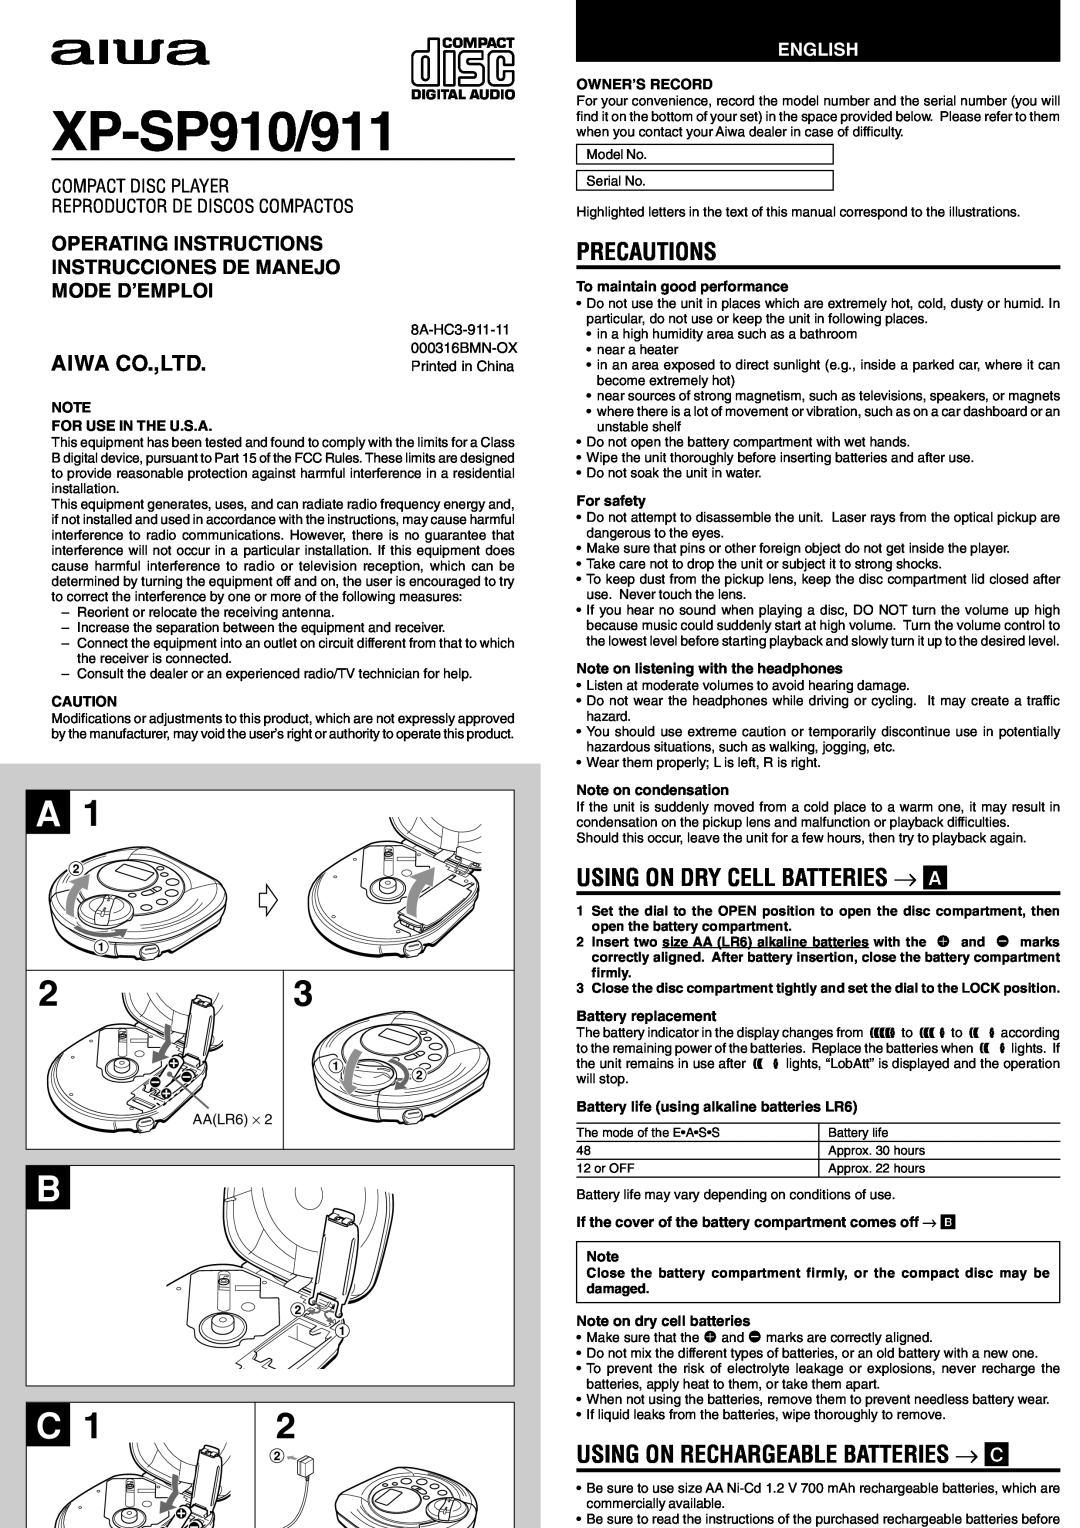 Aiwa XP-SP911 manual Precautions, Using On Dry Cell Batteries → A, Using On Rechargeable Batteries → C, Mode D’Emploi 